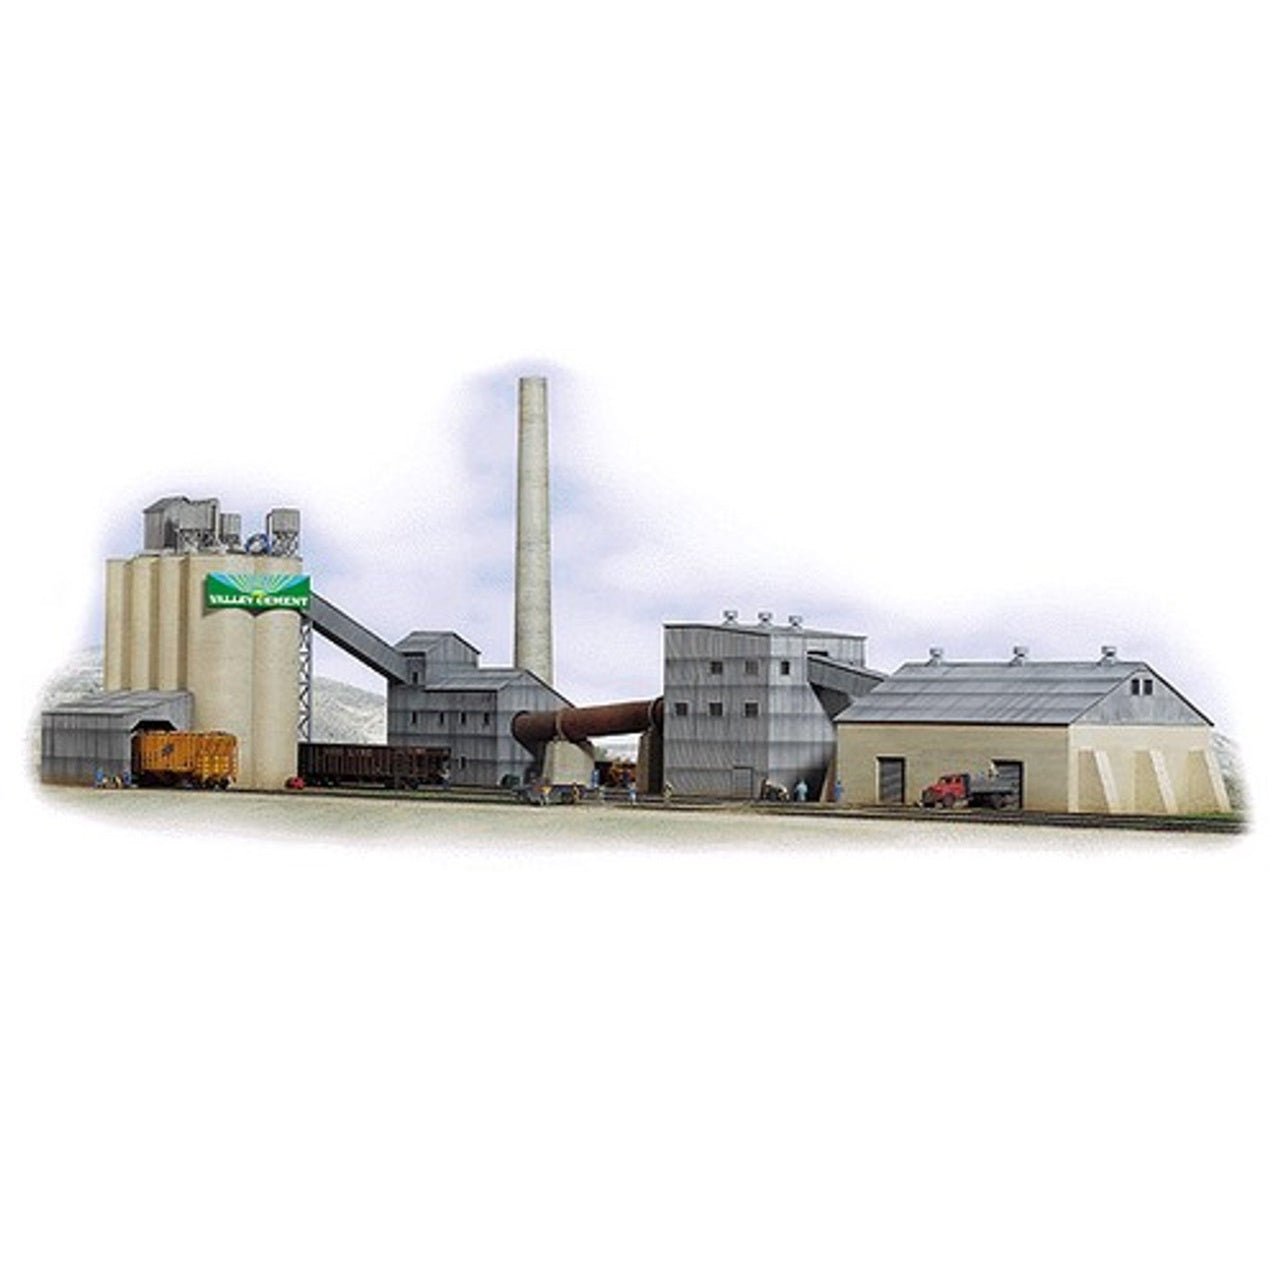 Walthers Cornerstone Valley Cement Plant Kit, HO Scale